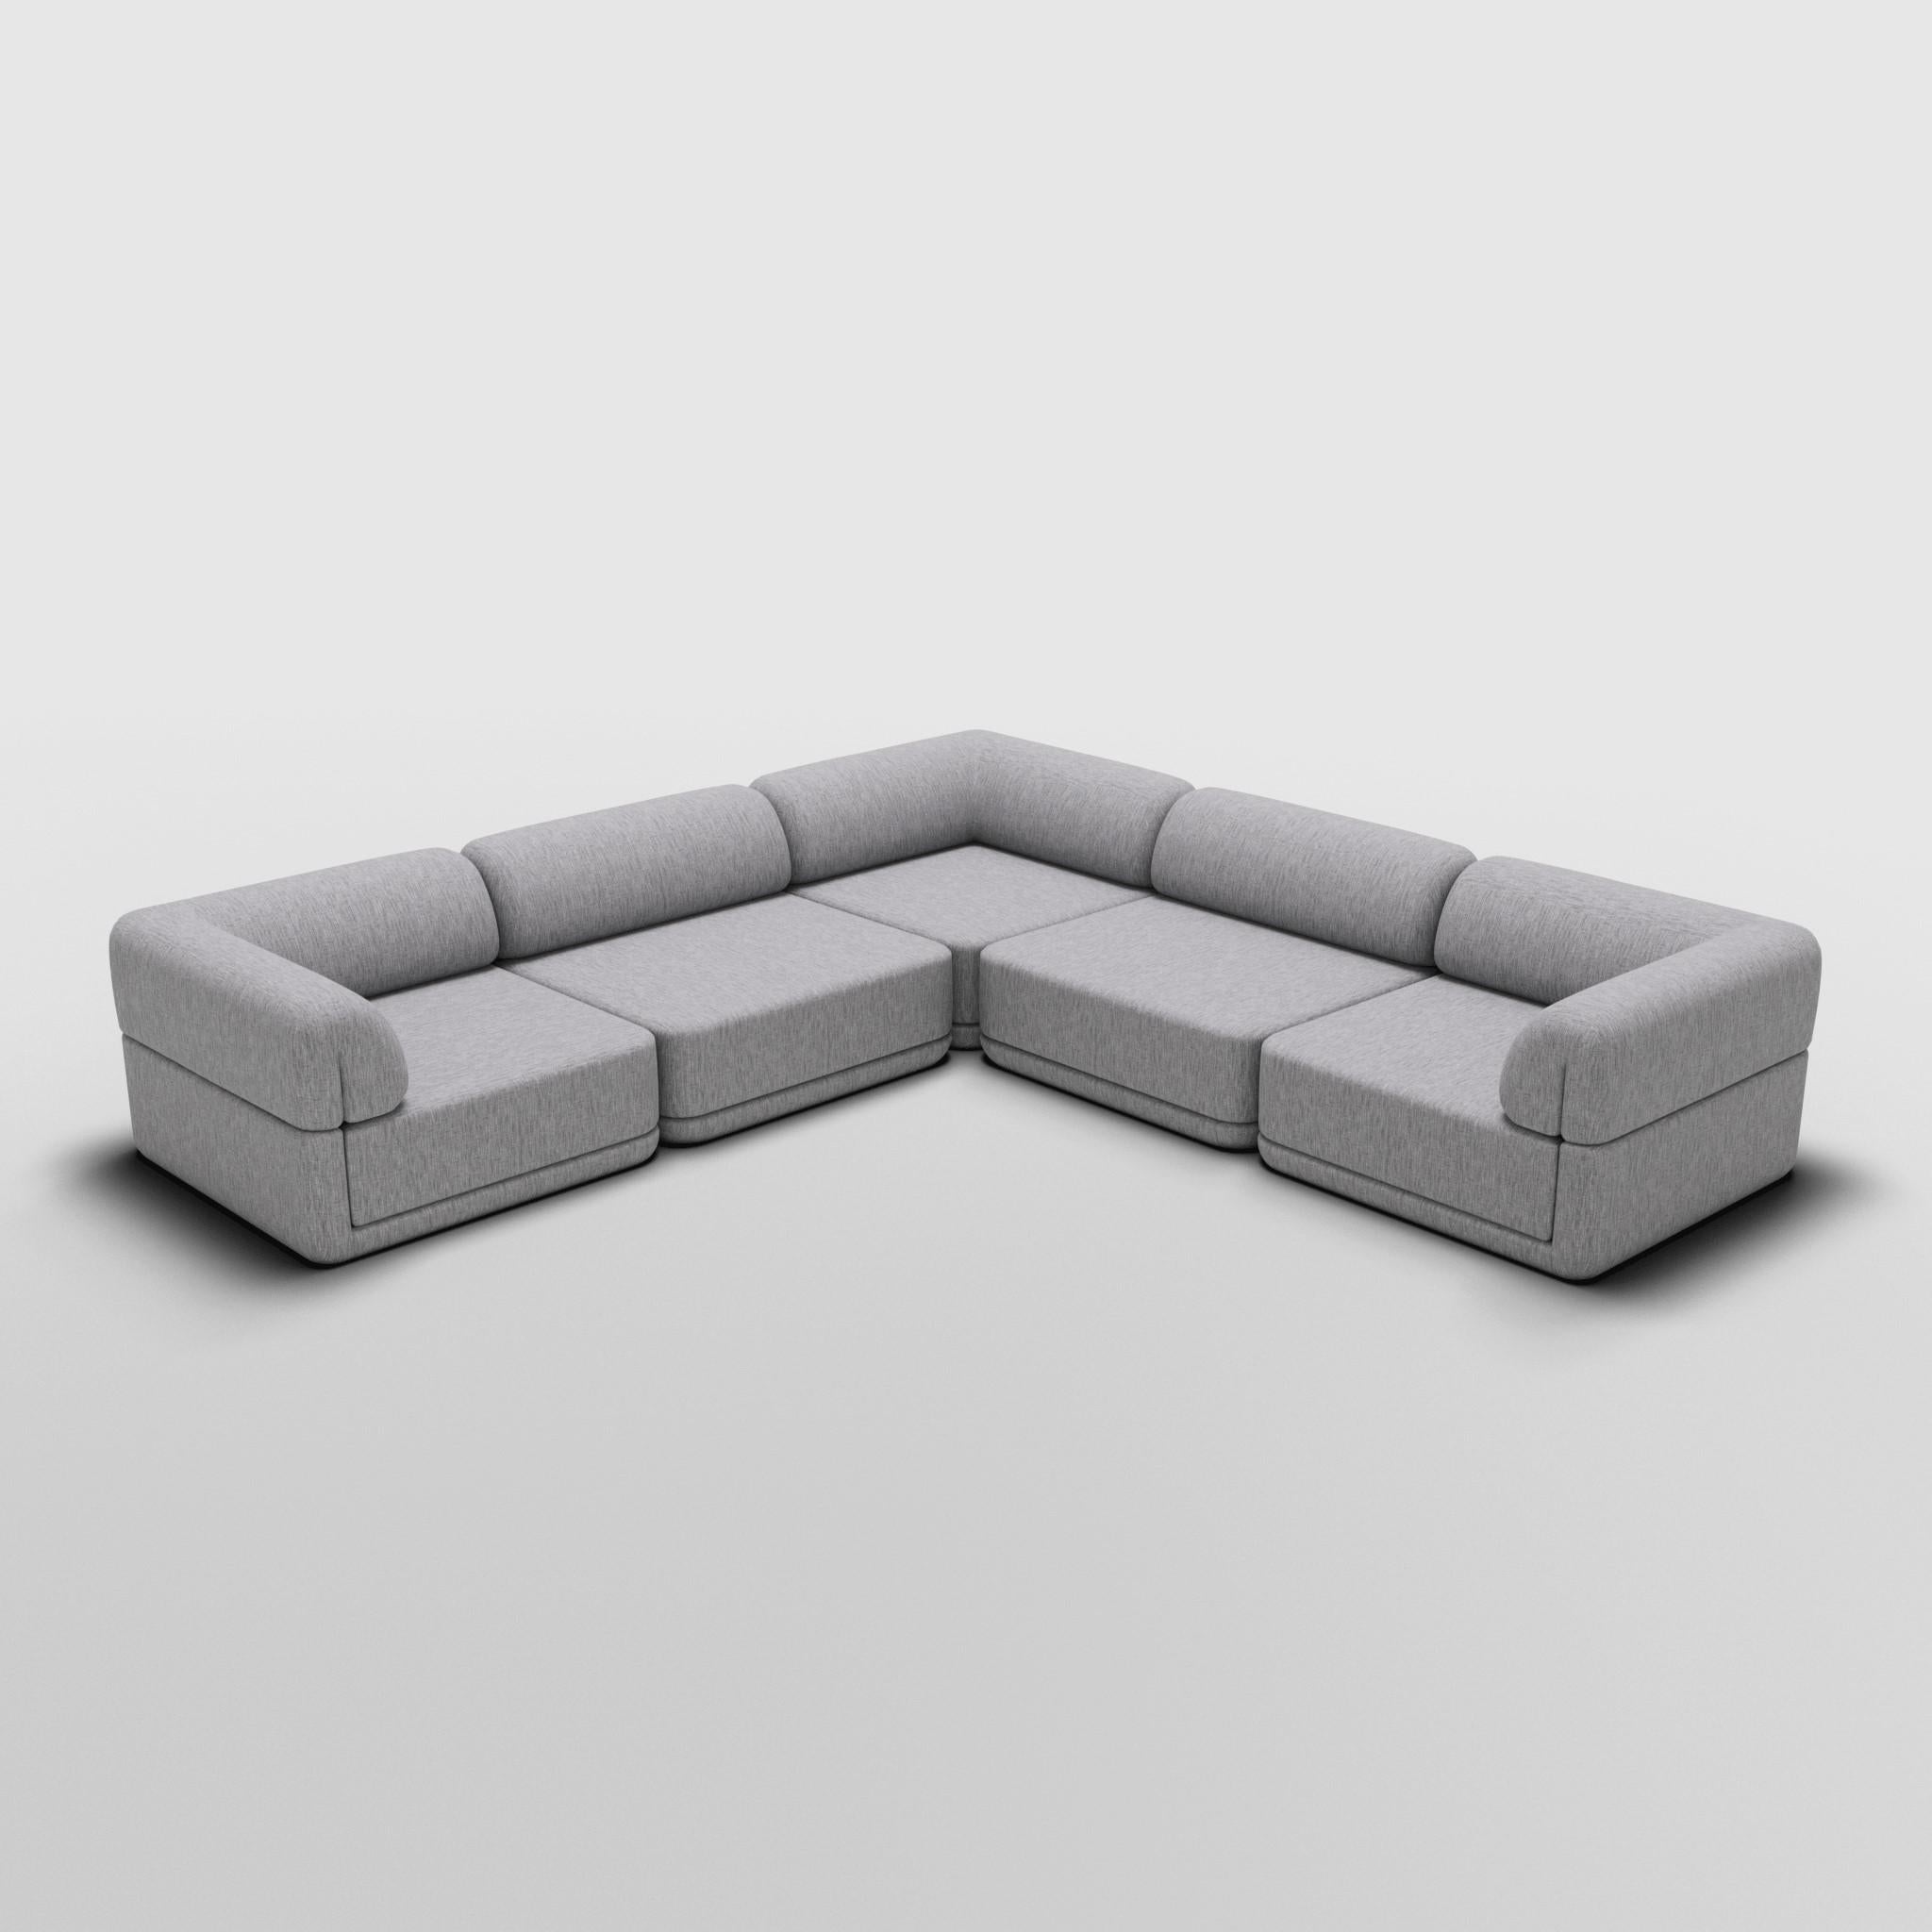 Corner Lounge Sectional - Inspired by 70s Italian Luxury Furniture

Discover The Cube Sofa, where art meets adaptability. Its sculptural design and customizable comfort create endless possibilities for your living space. Make a statement, elevate